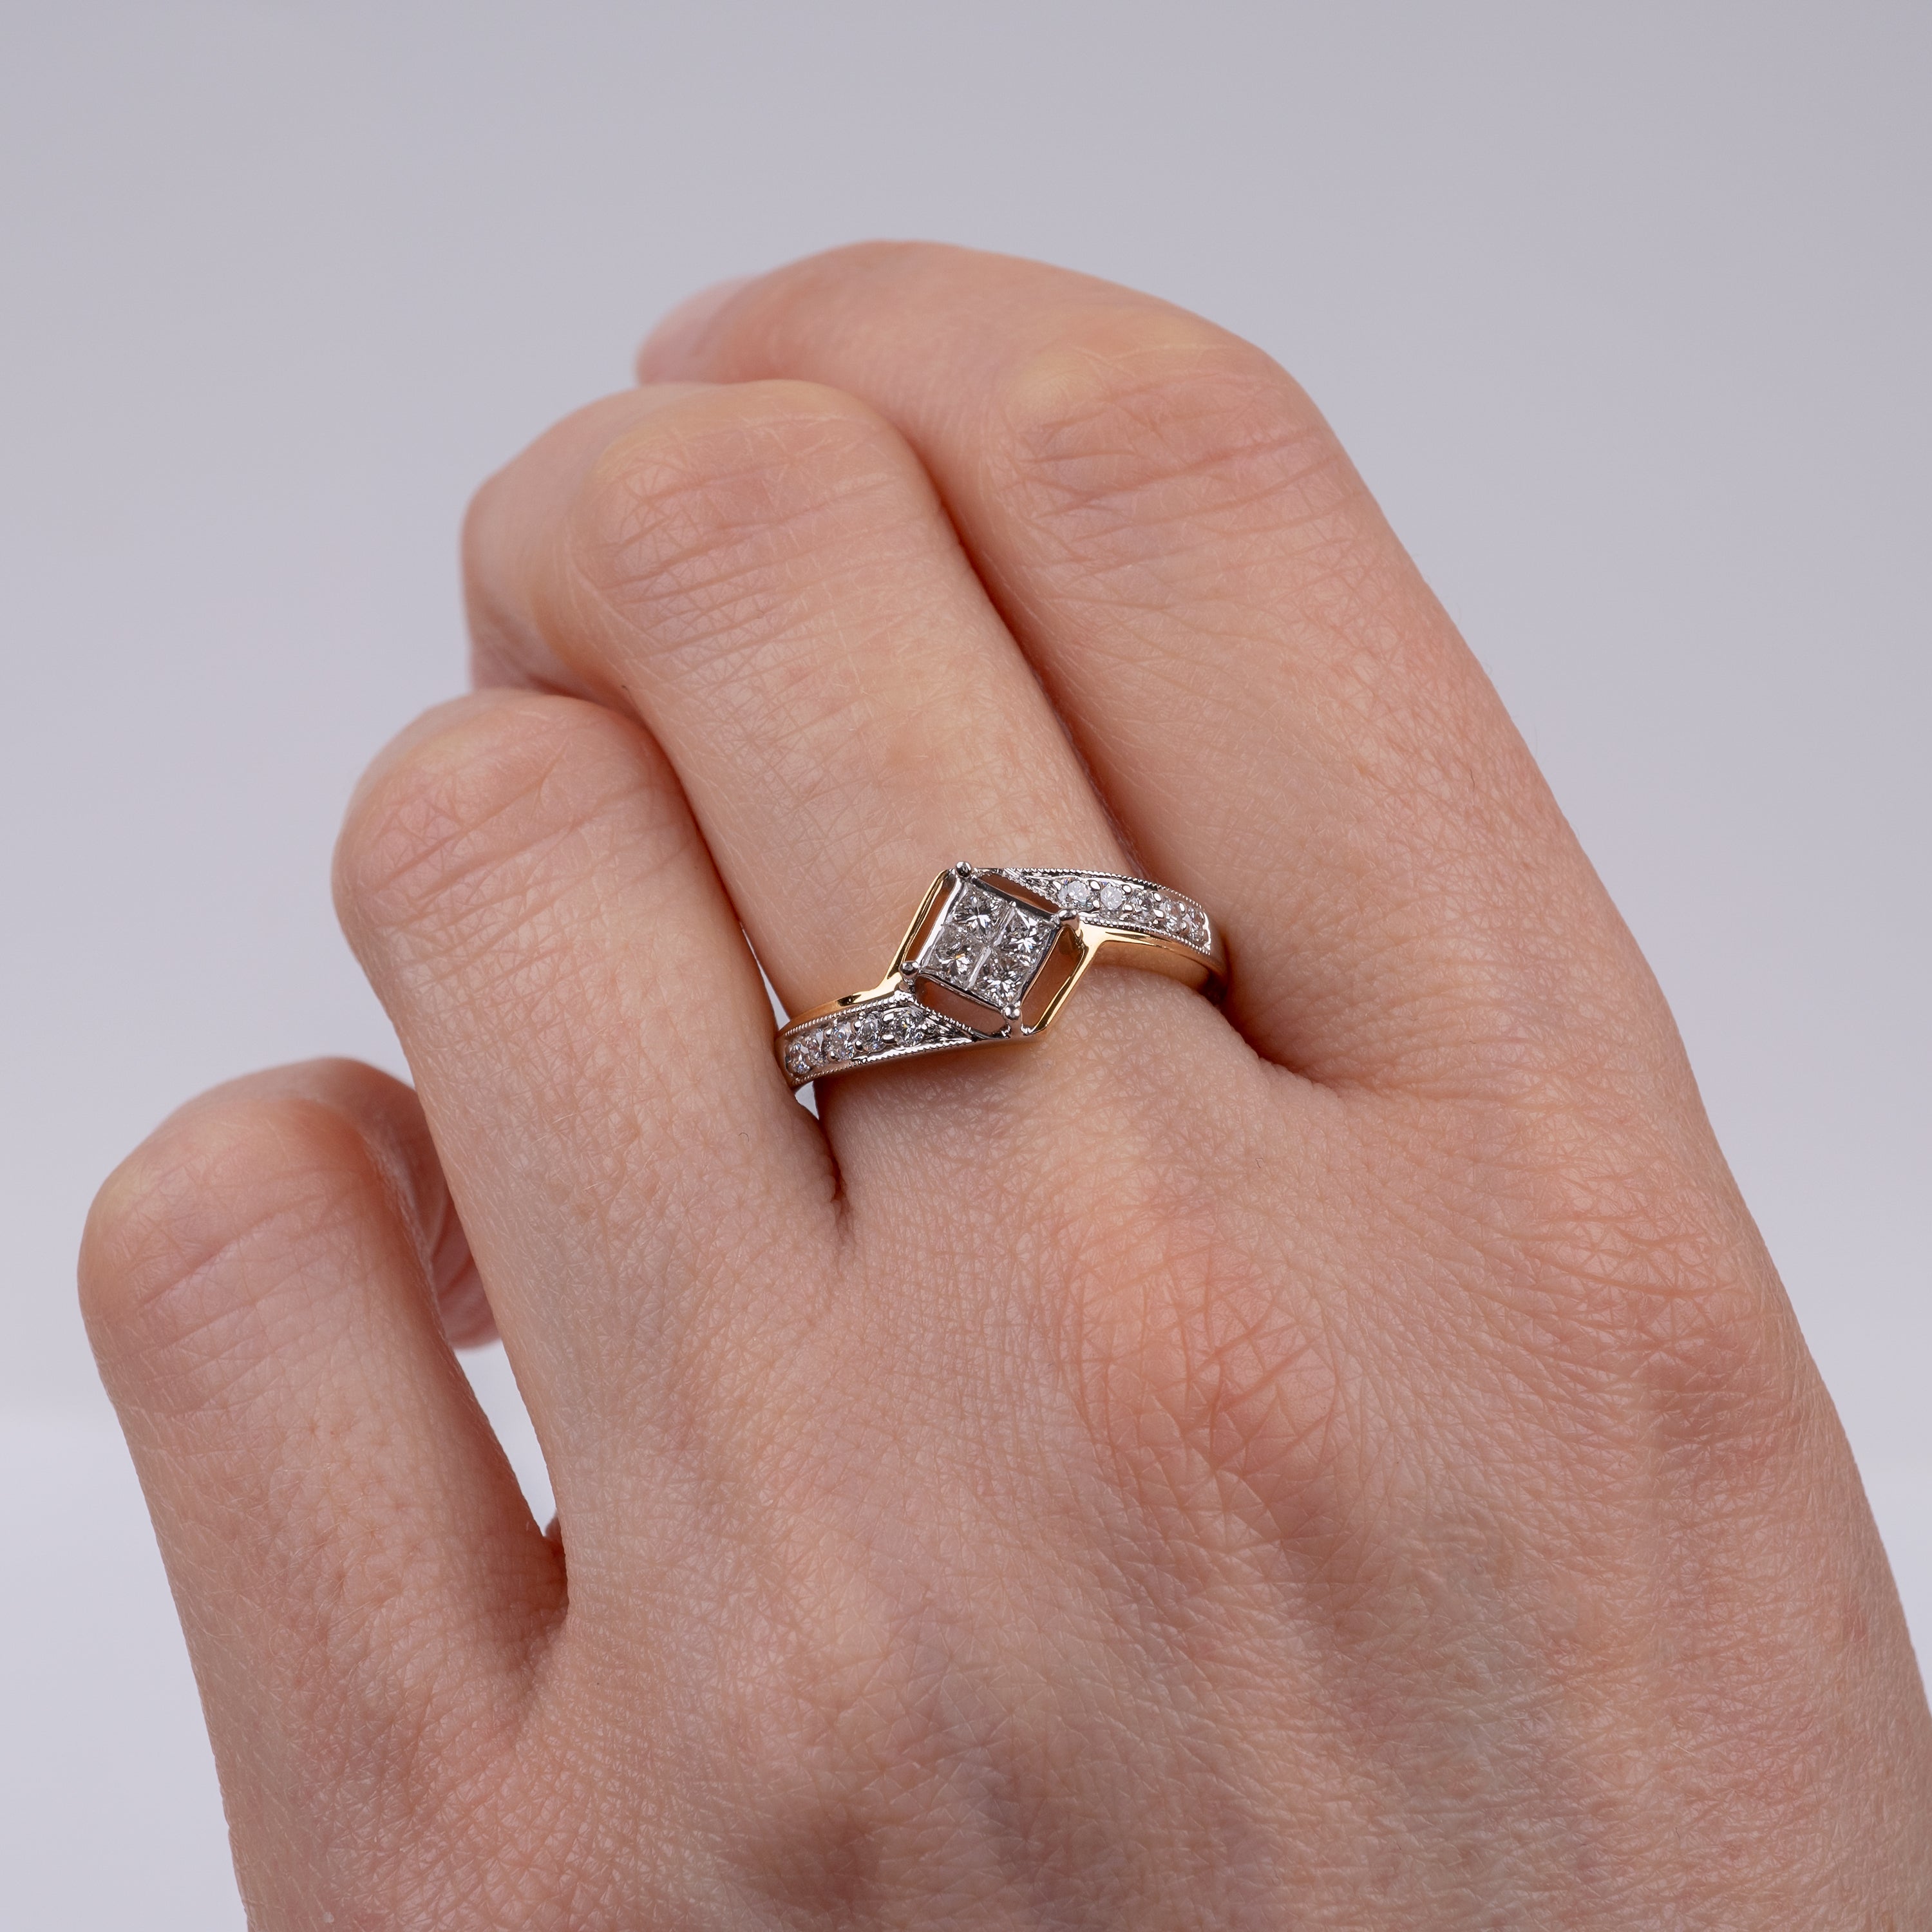 Three Stone Ring/Dress Ring/Engagement Ring for women in 18ct white gold  with princess cut diamonds in an invisible setting